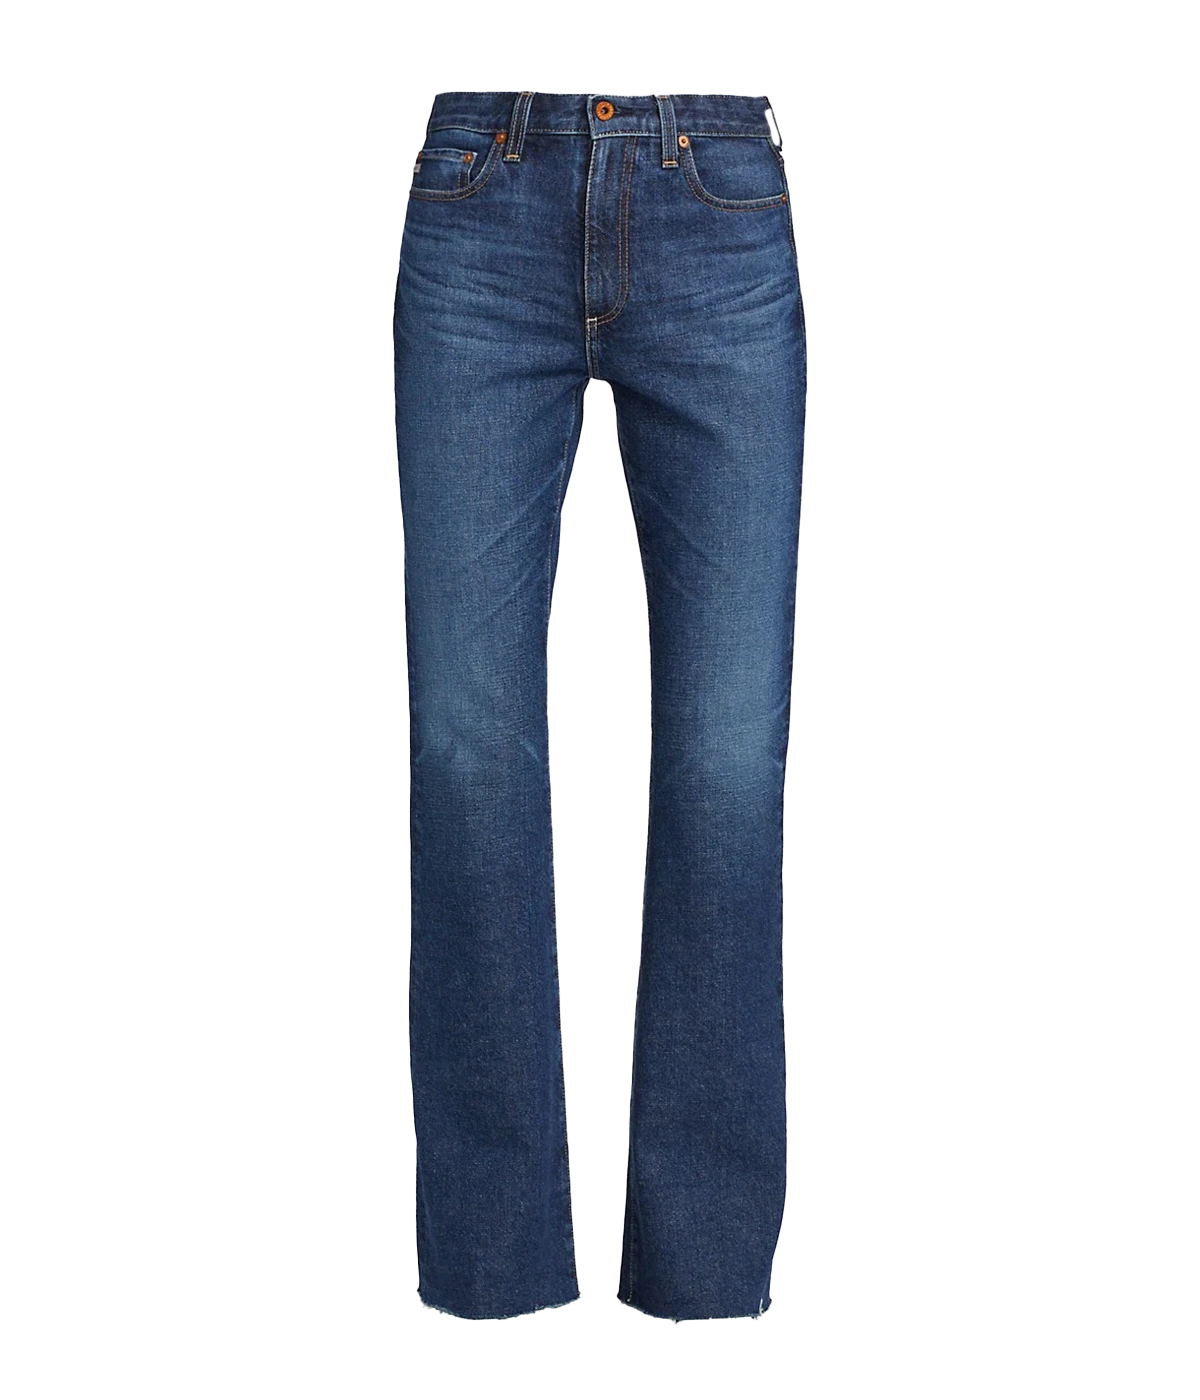 Image of a dark wash straight full length jean, with gold hardware, lived in wash, button and fly fastening and raw hem detail.  